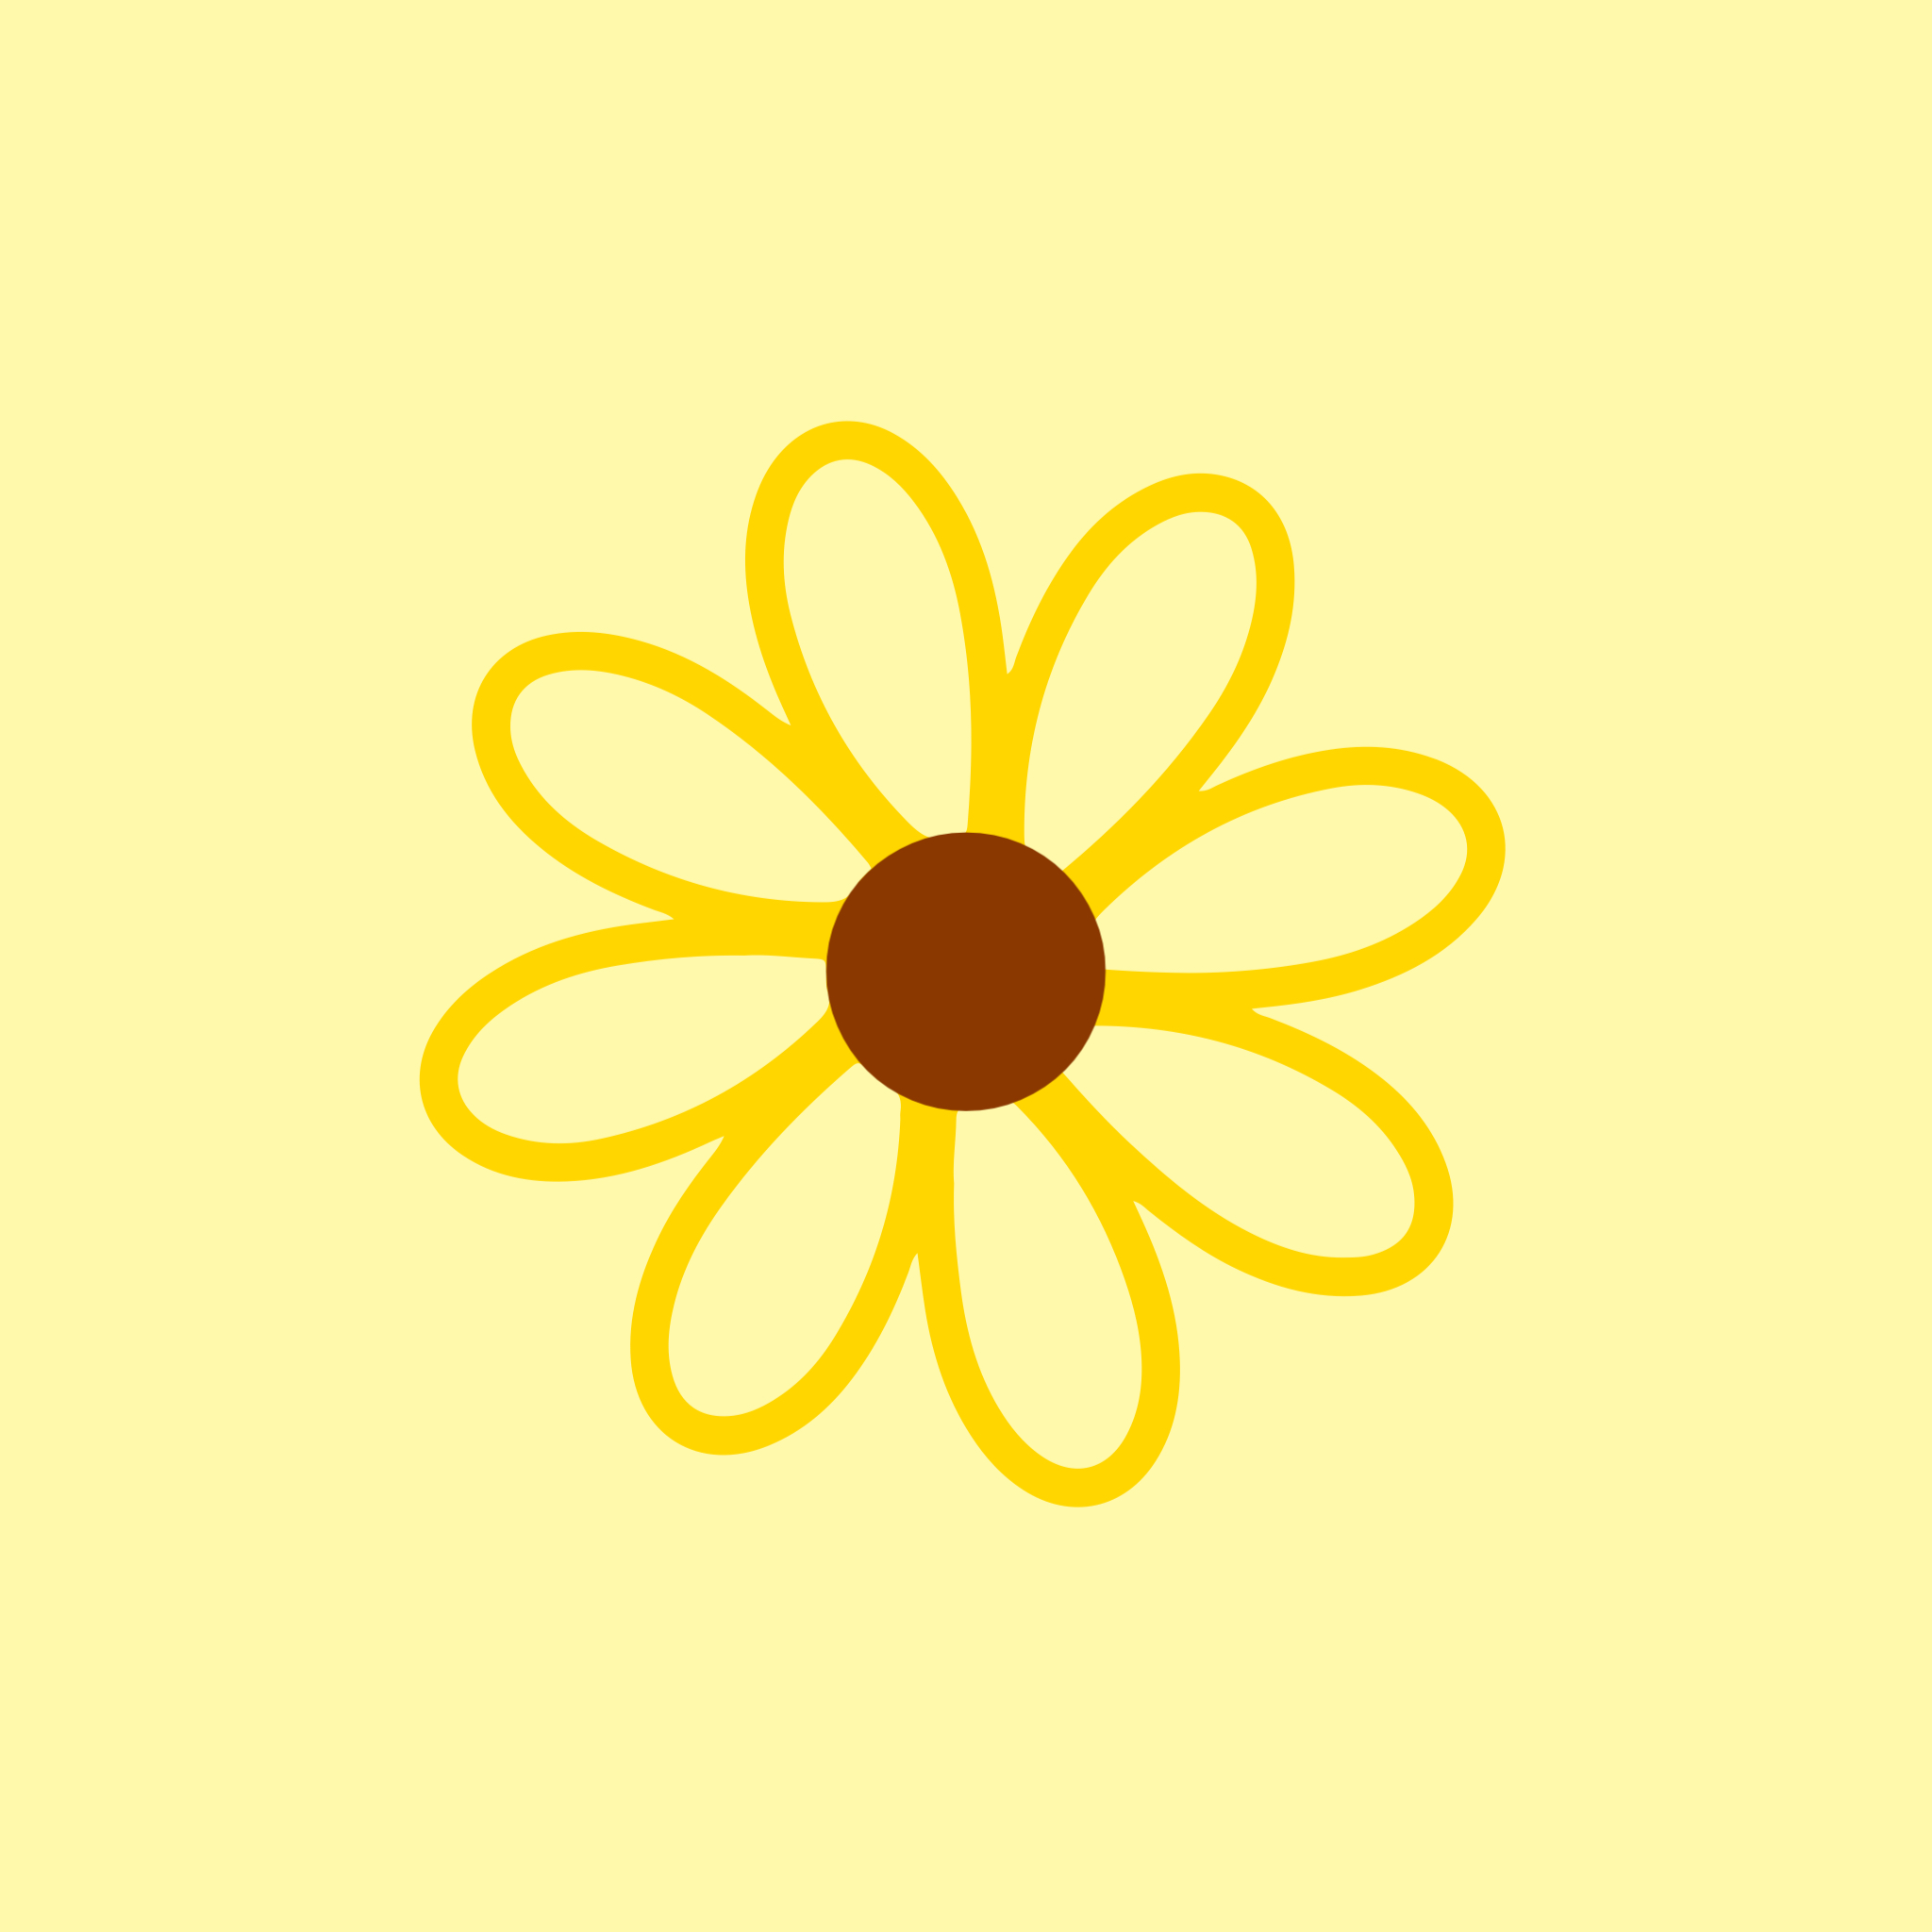 Logo of The Sunflowers